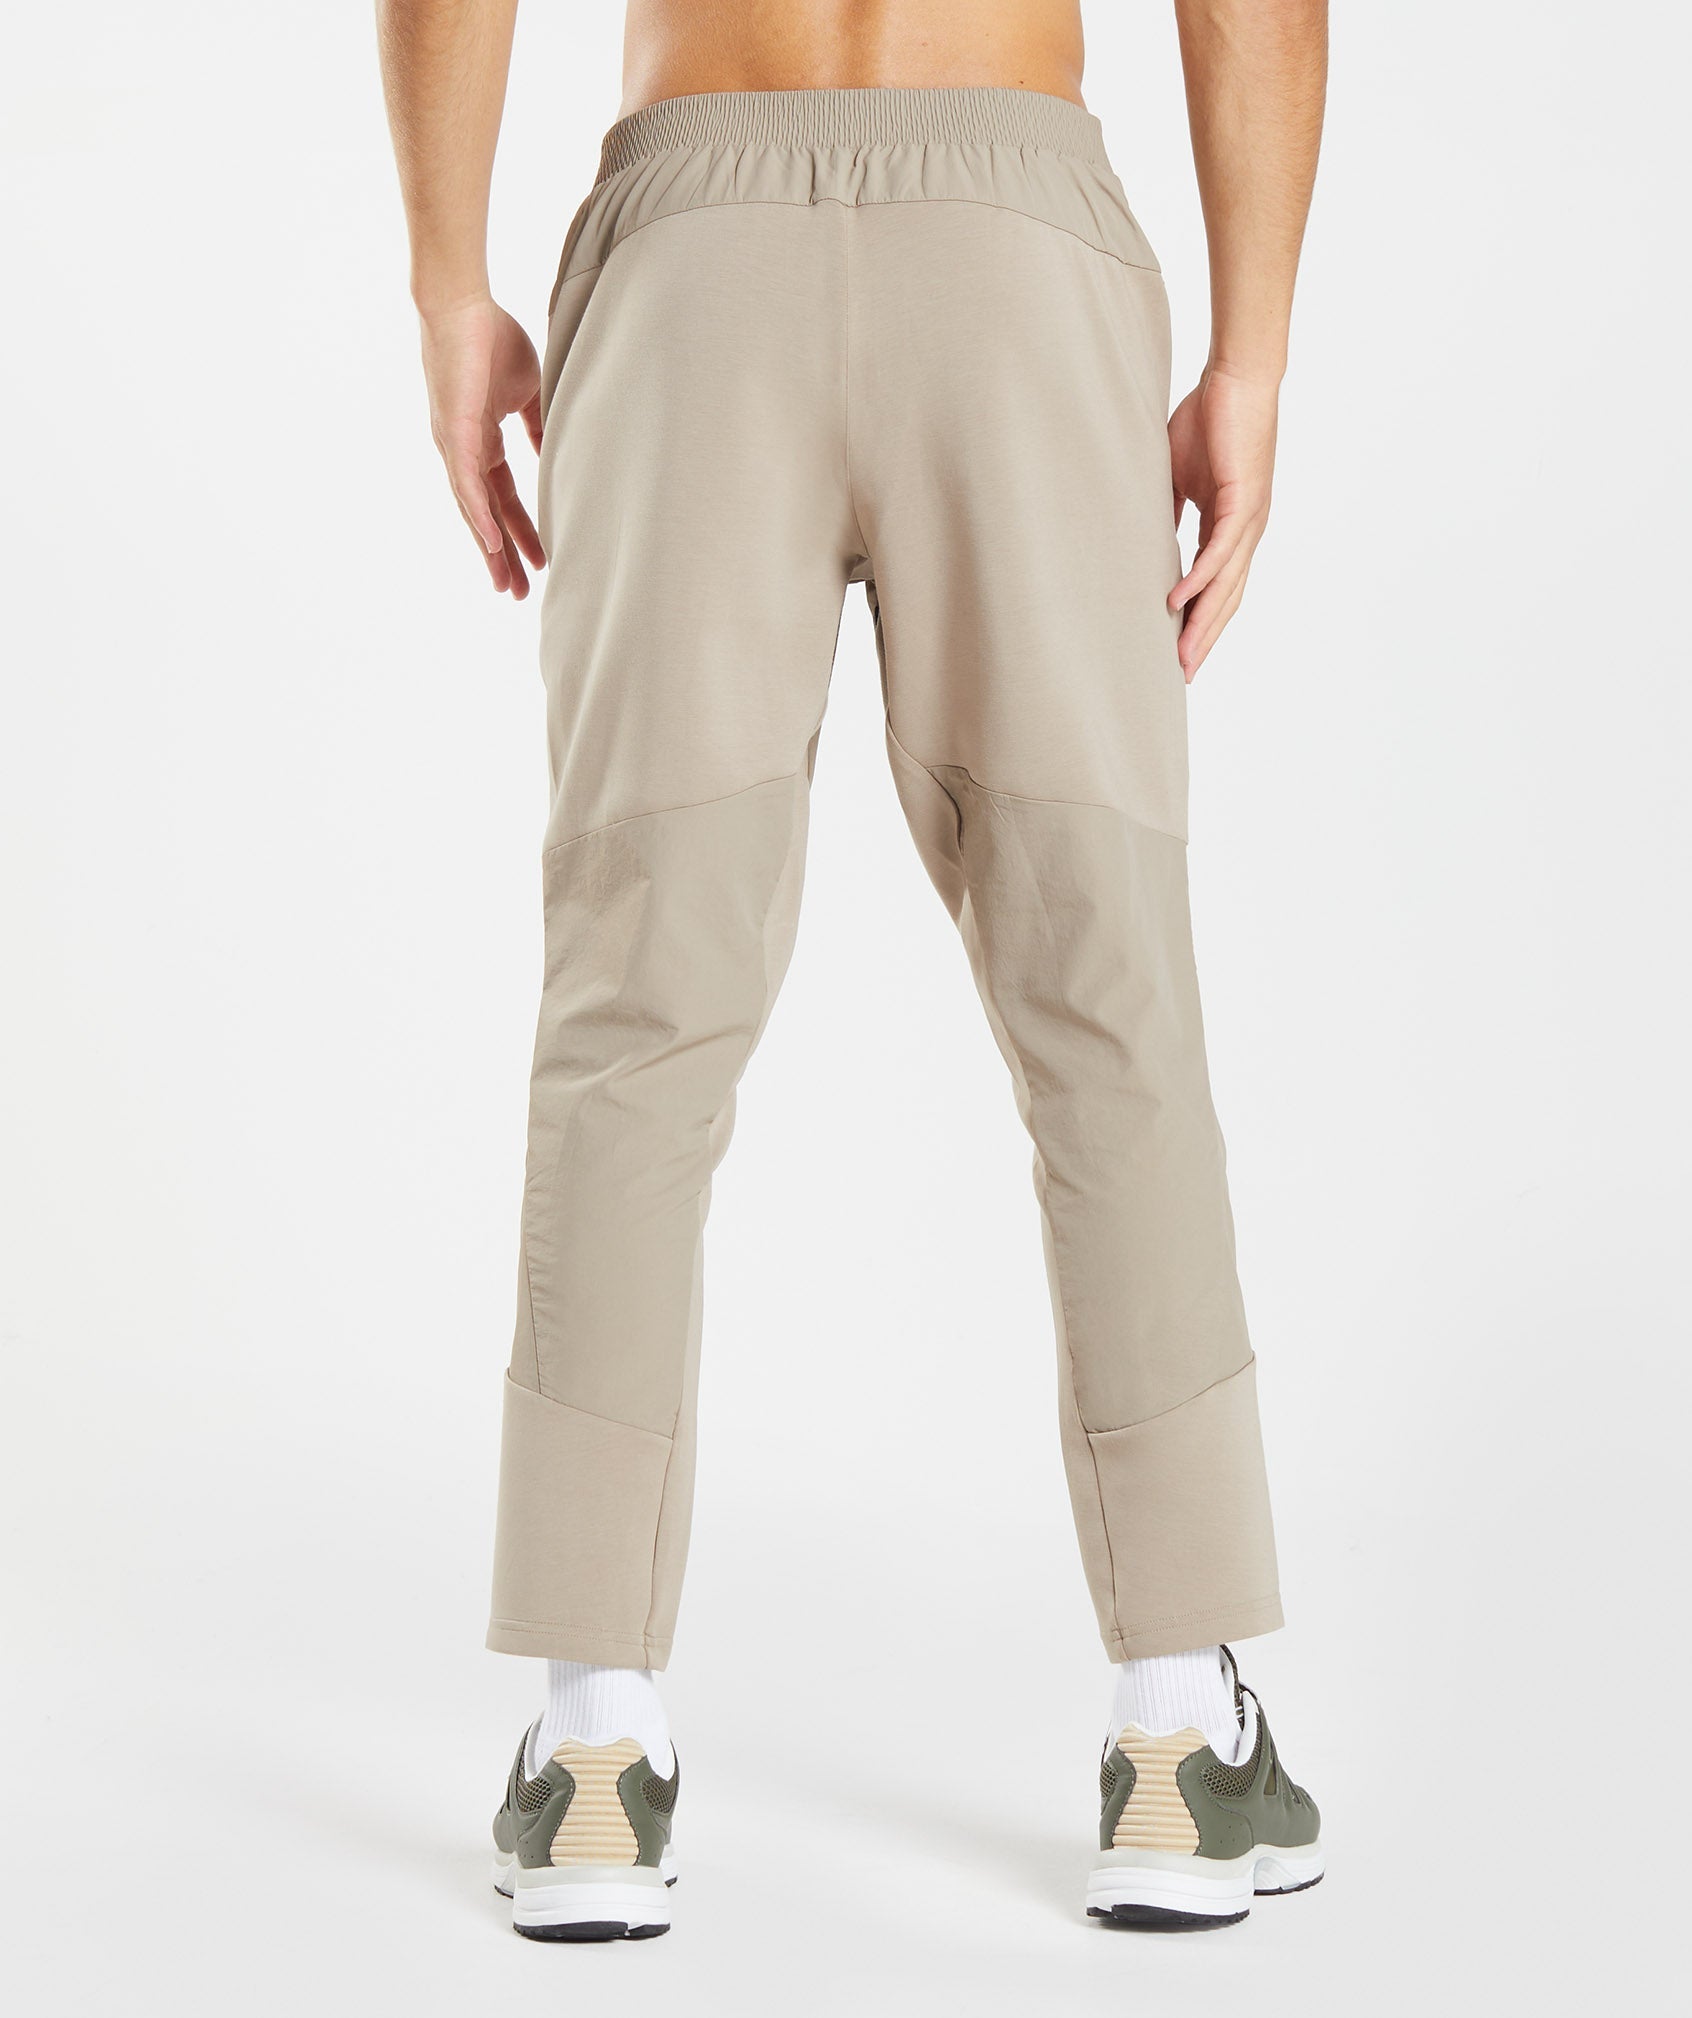 Retake Woven Joggers in Cement Brown